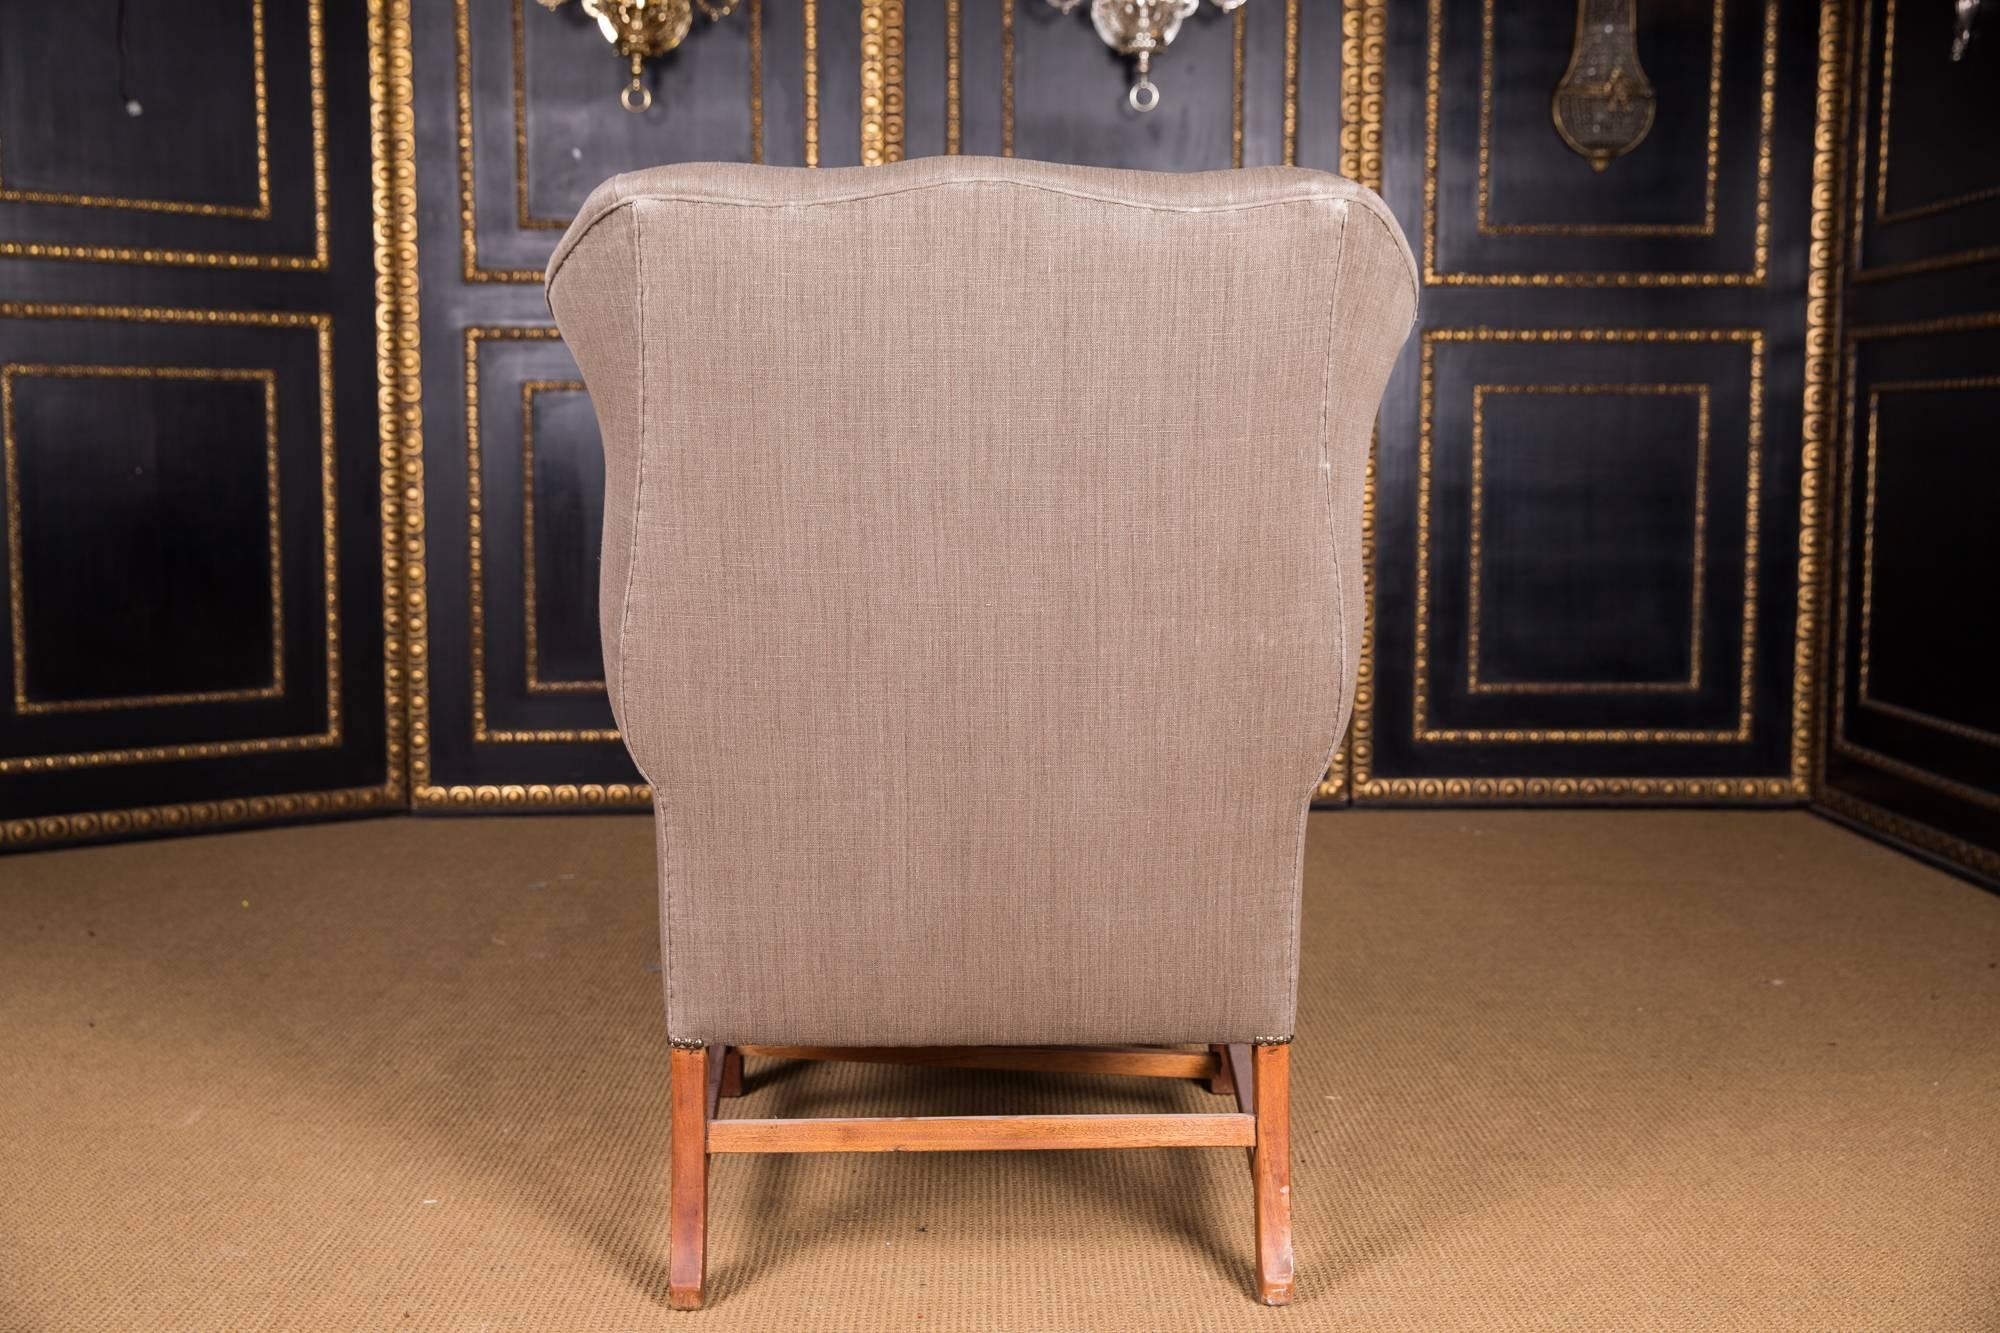 Original English Chesterfield Armchair with High Quality Linen Fabric 2